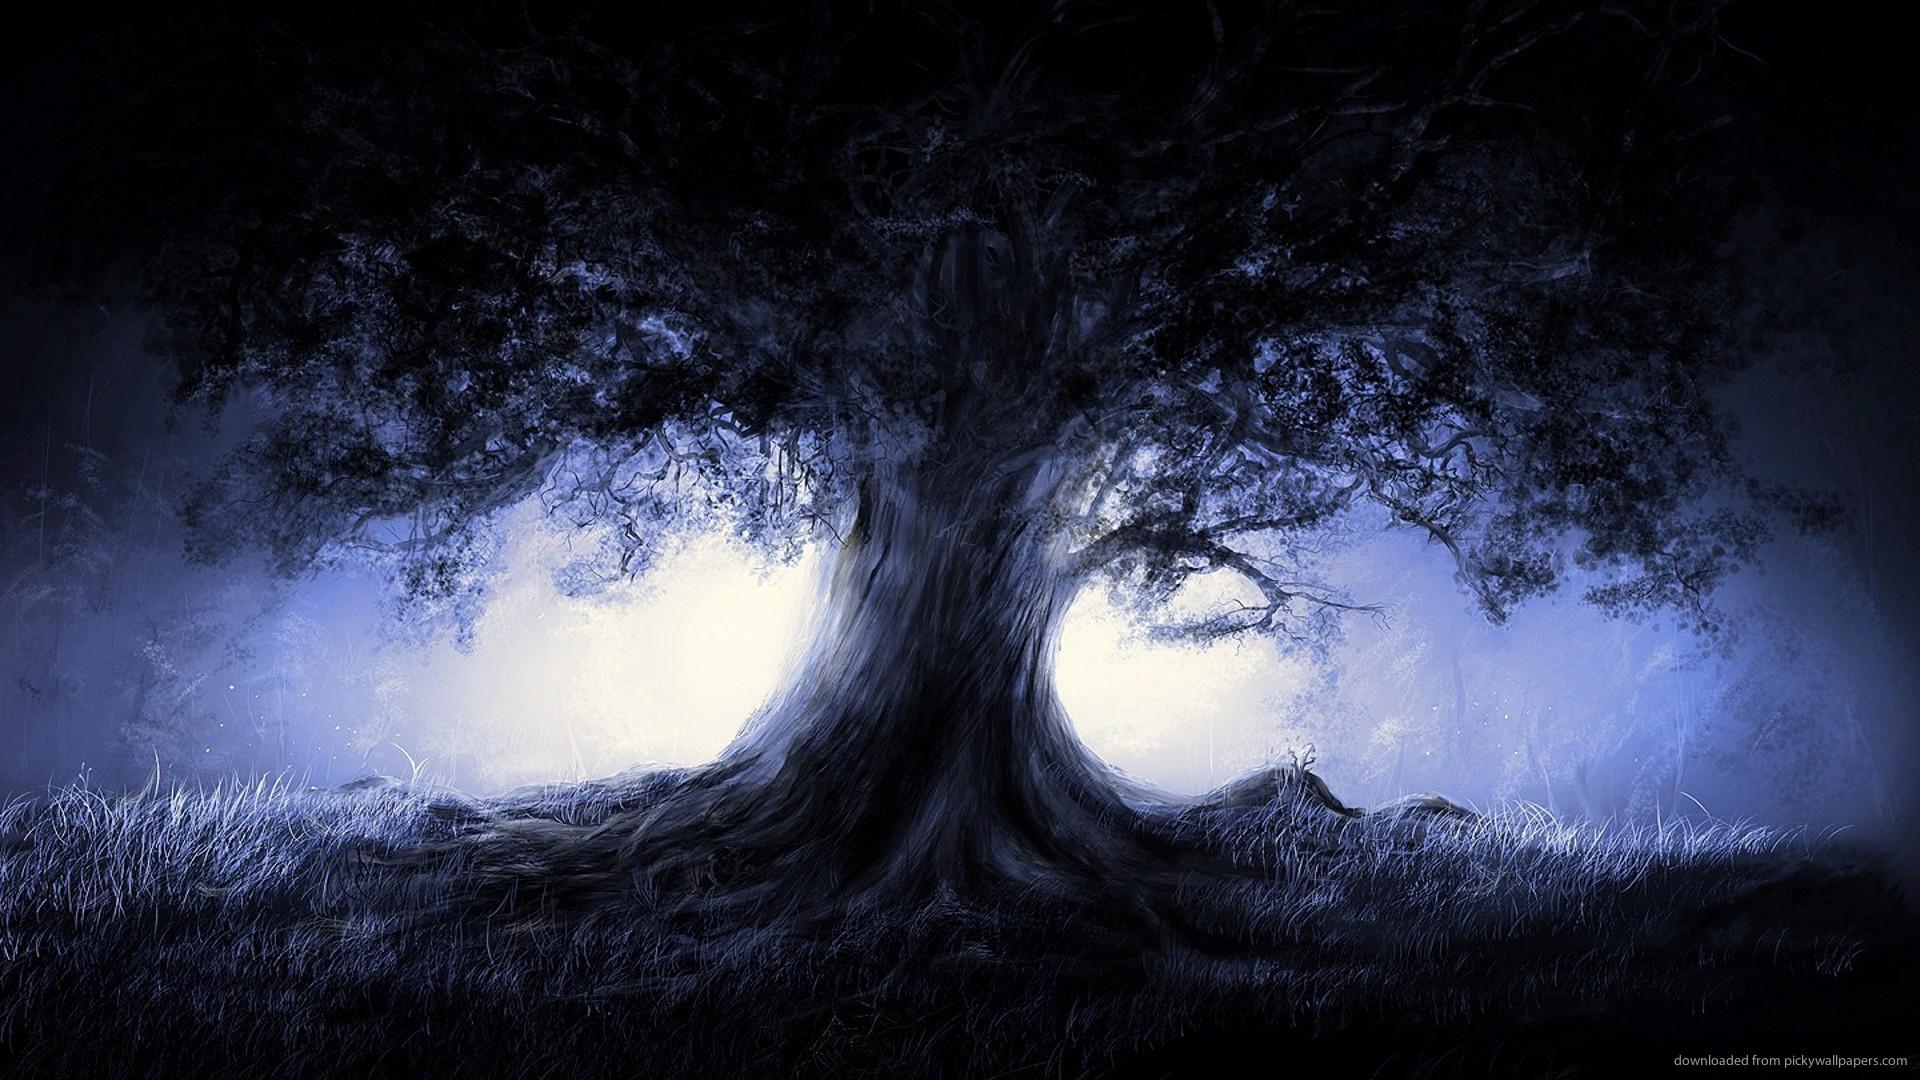 The Tree Of Darkness Wallpaper For Blackberry Curve